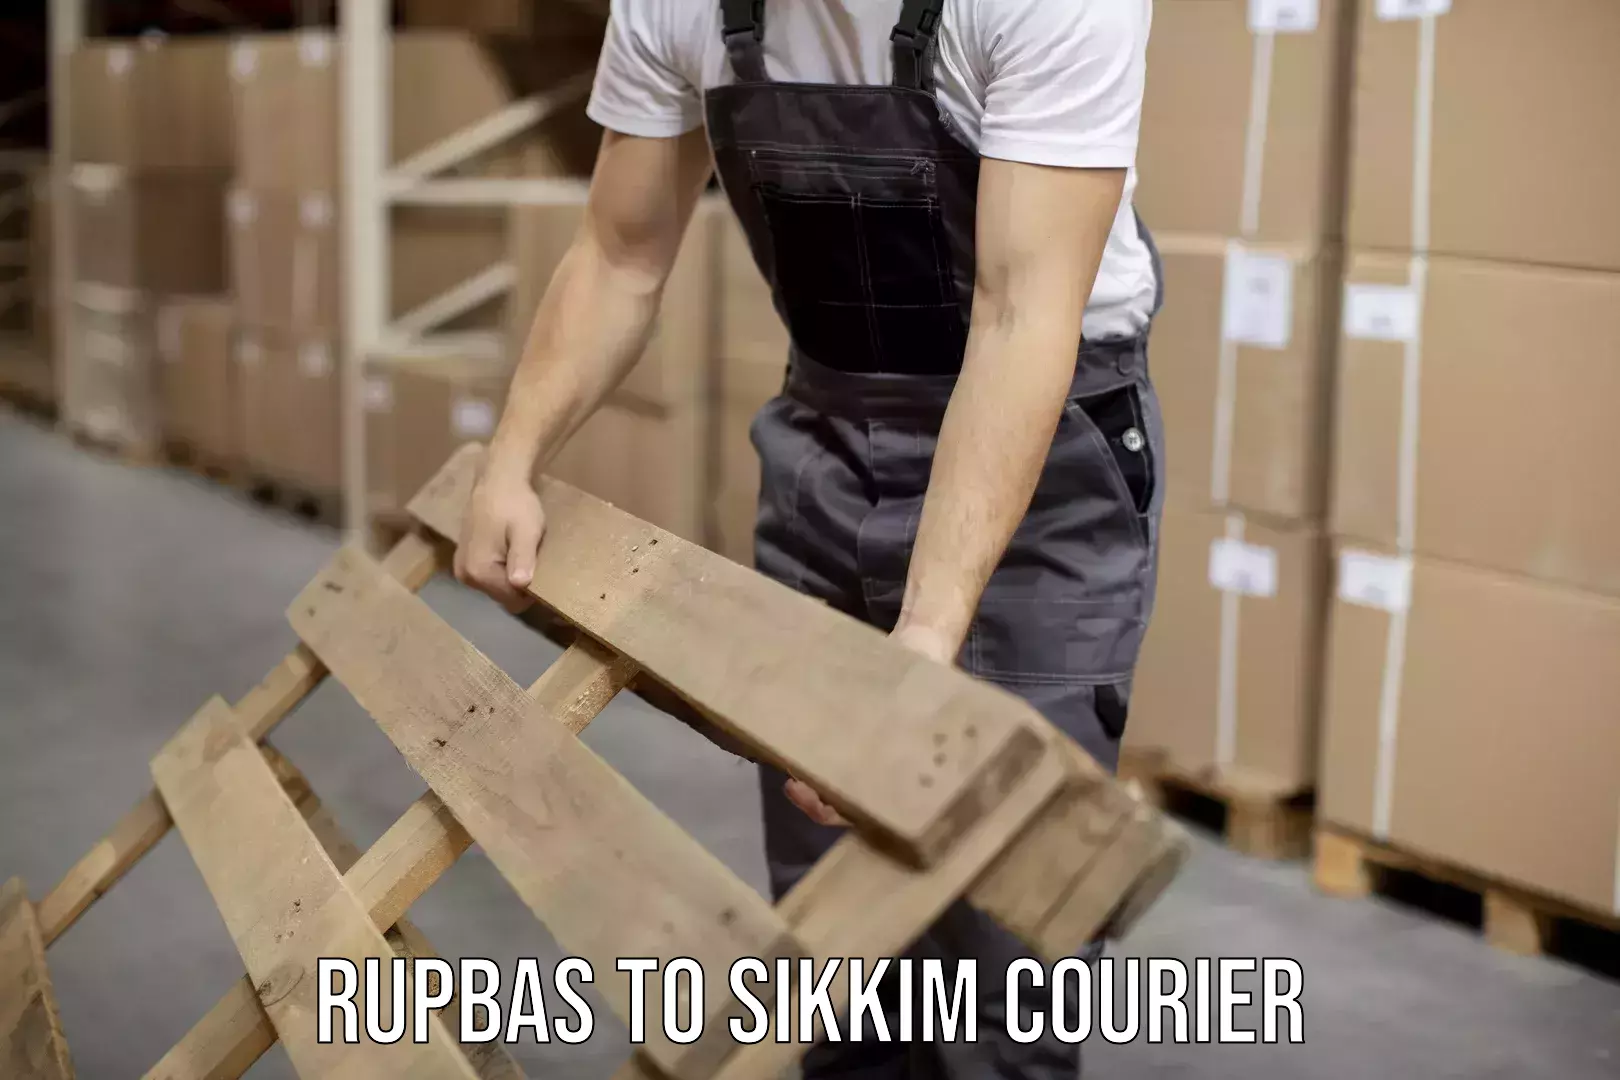 24/7 courier service Rupbas to Sikkim